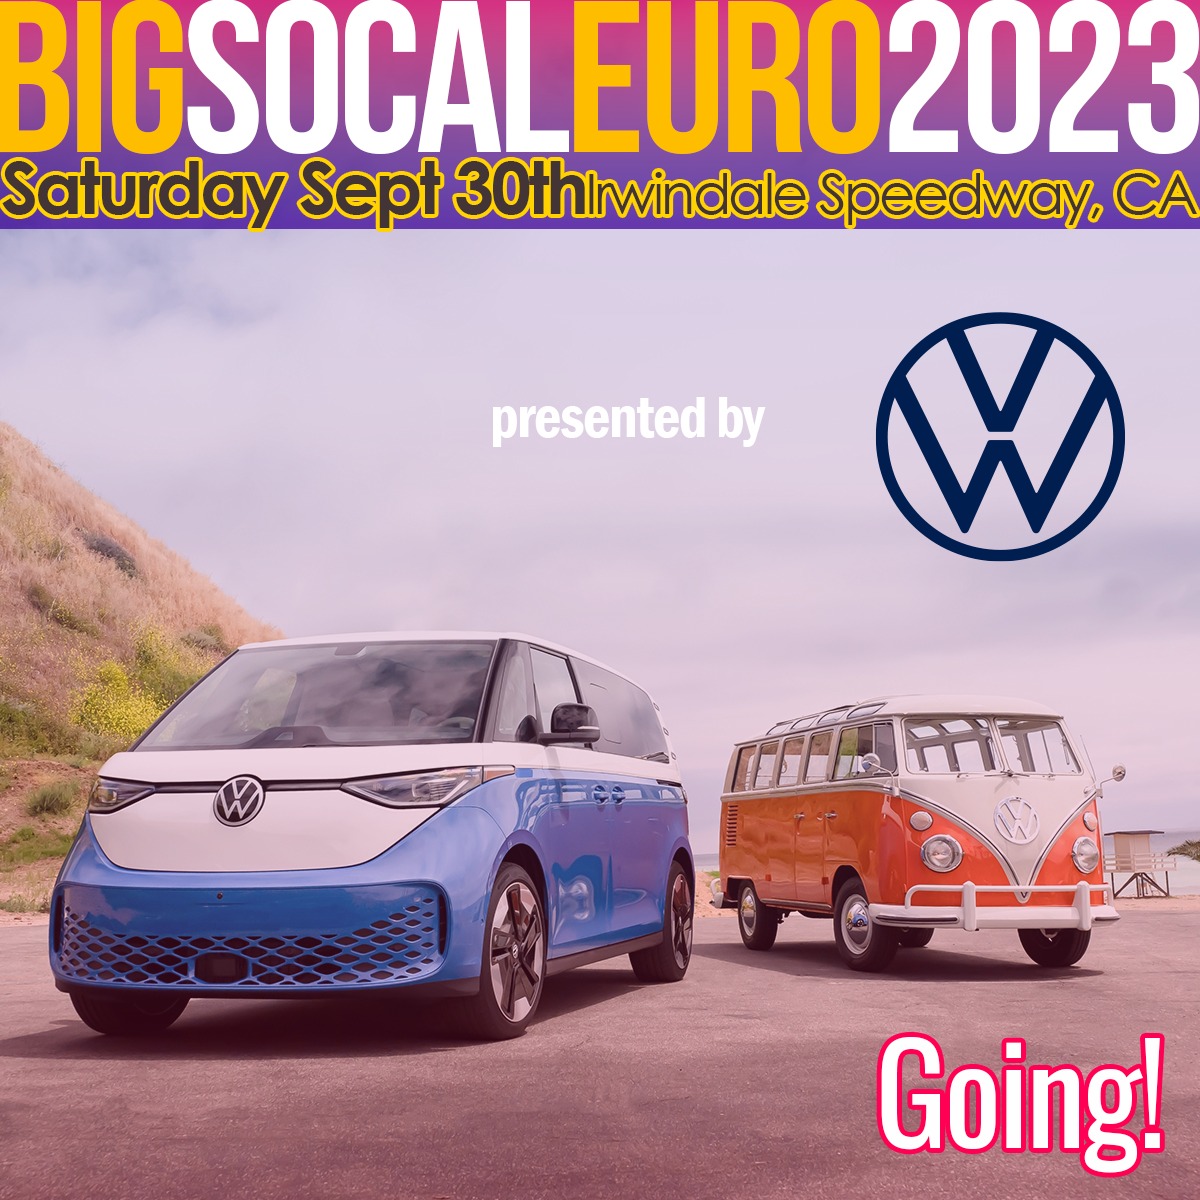 Modern and classic VW bus for promotion of Big Socal Euro event Irwindale 2023